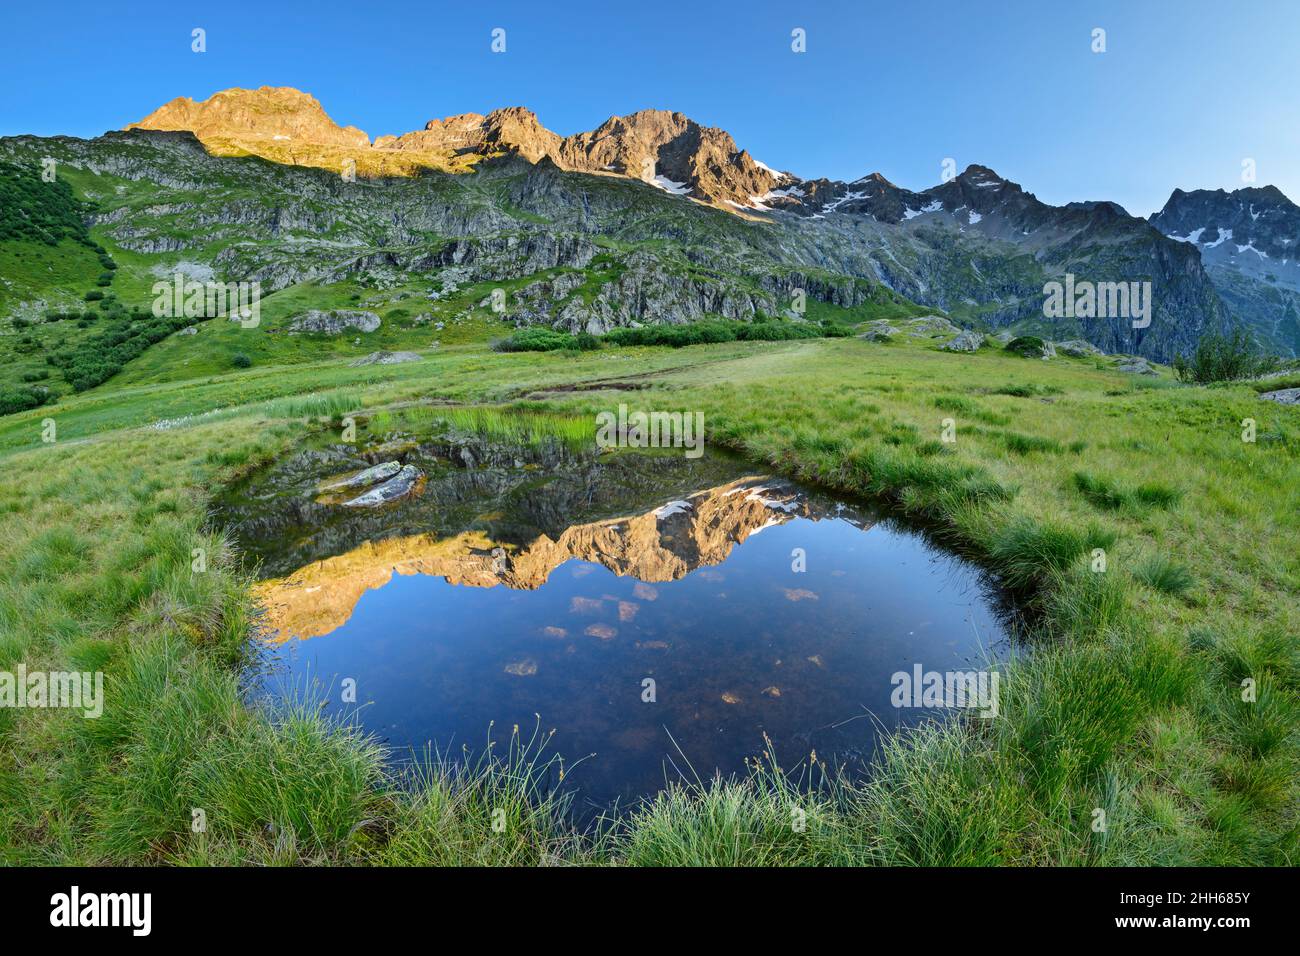 Reflection of mountain range and blue sky in sea eye puddle, Valgaudemar, Ecrins National Park, France Stock Photo